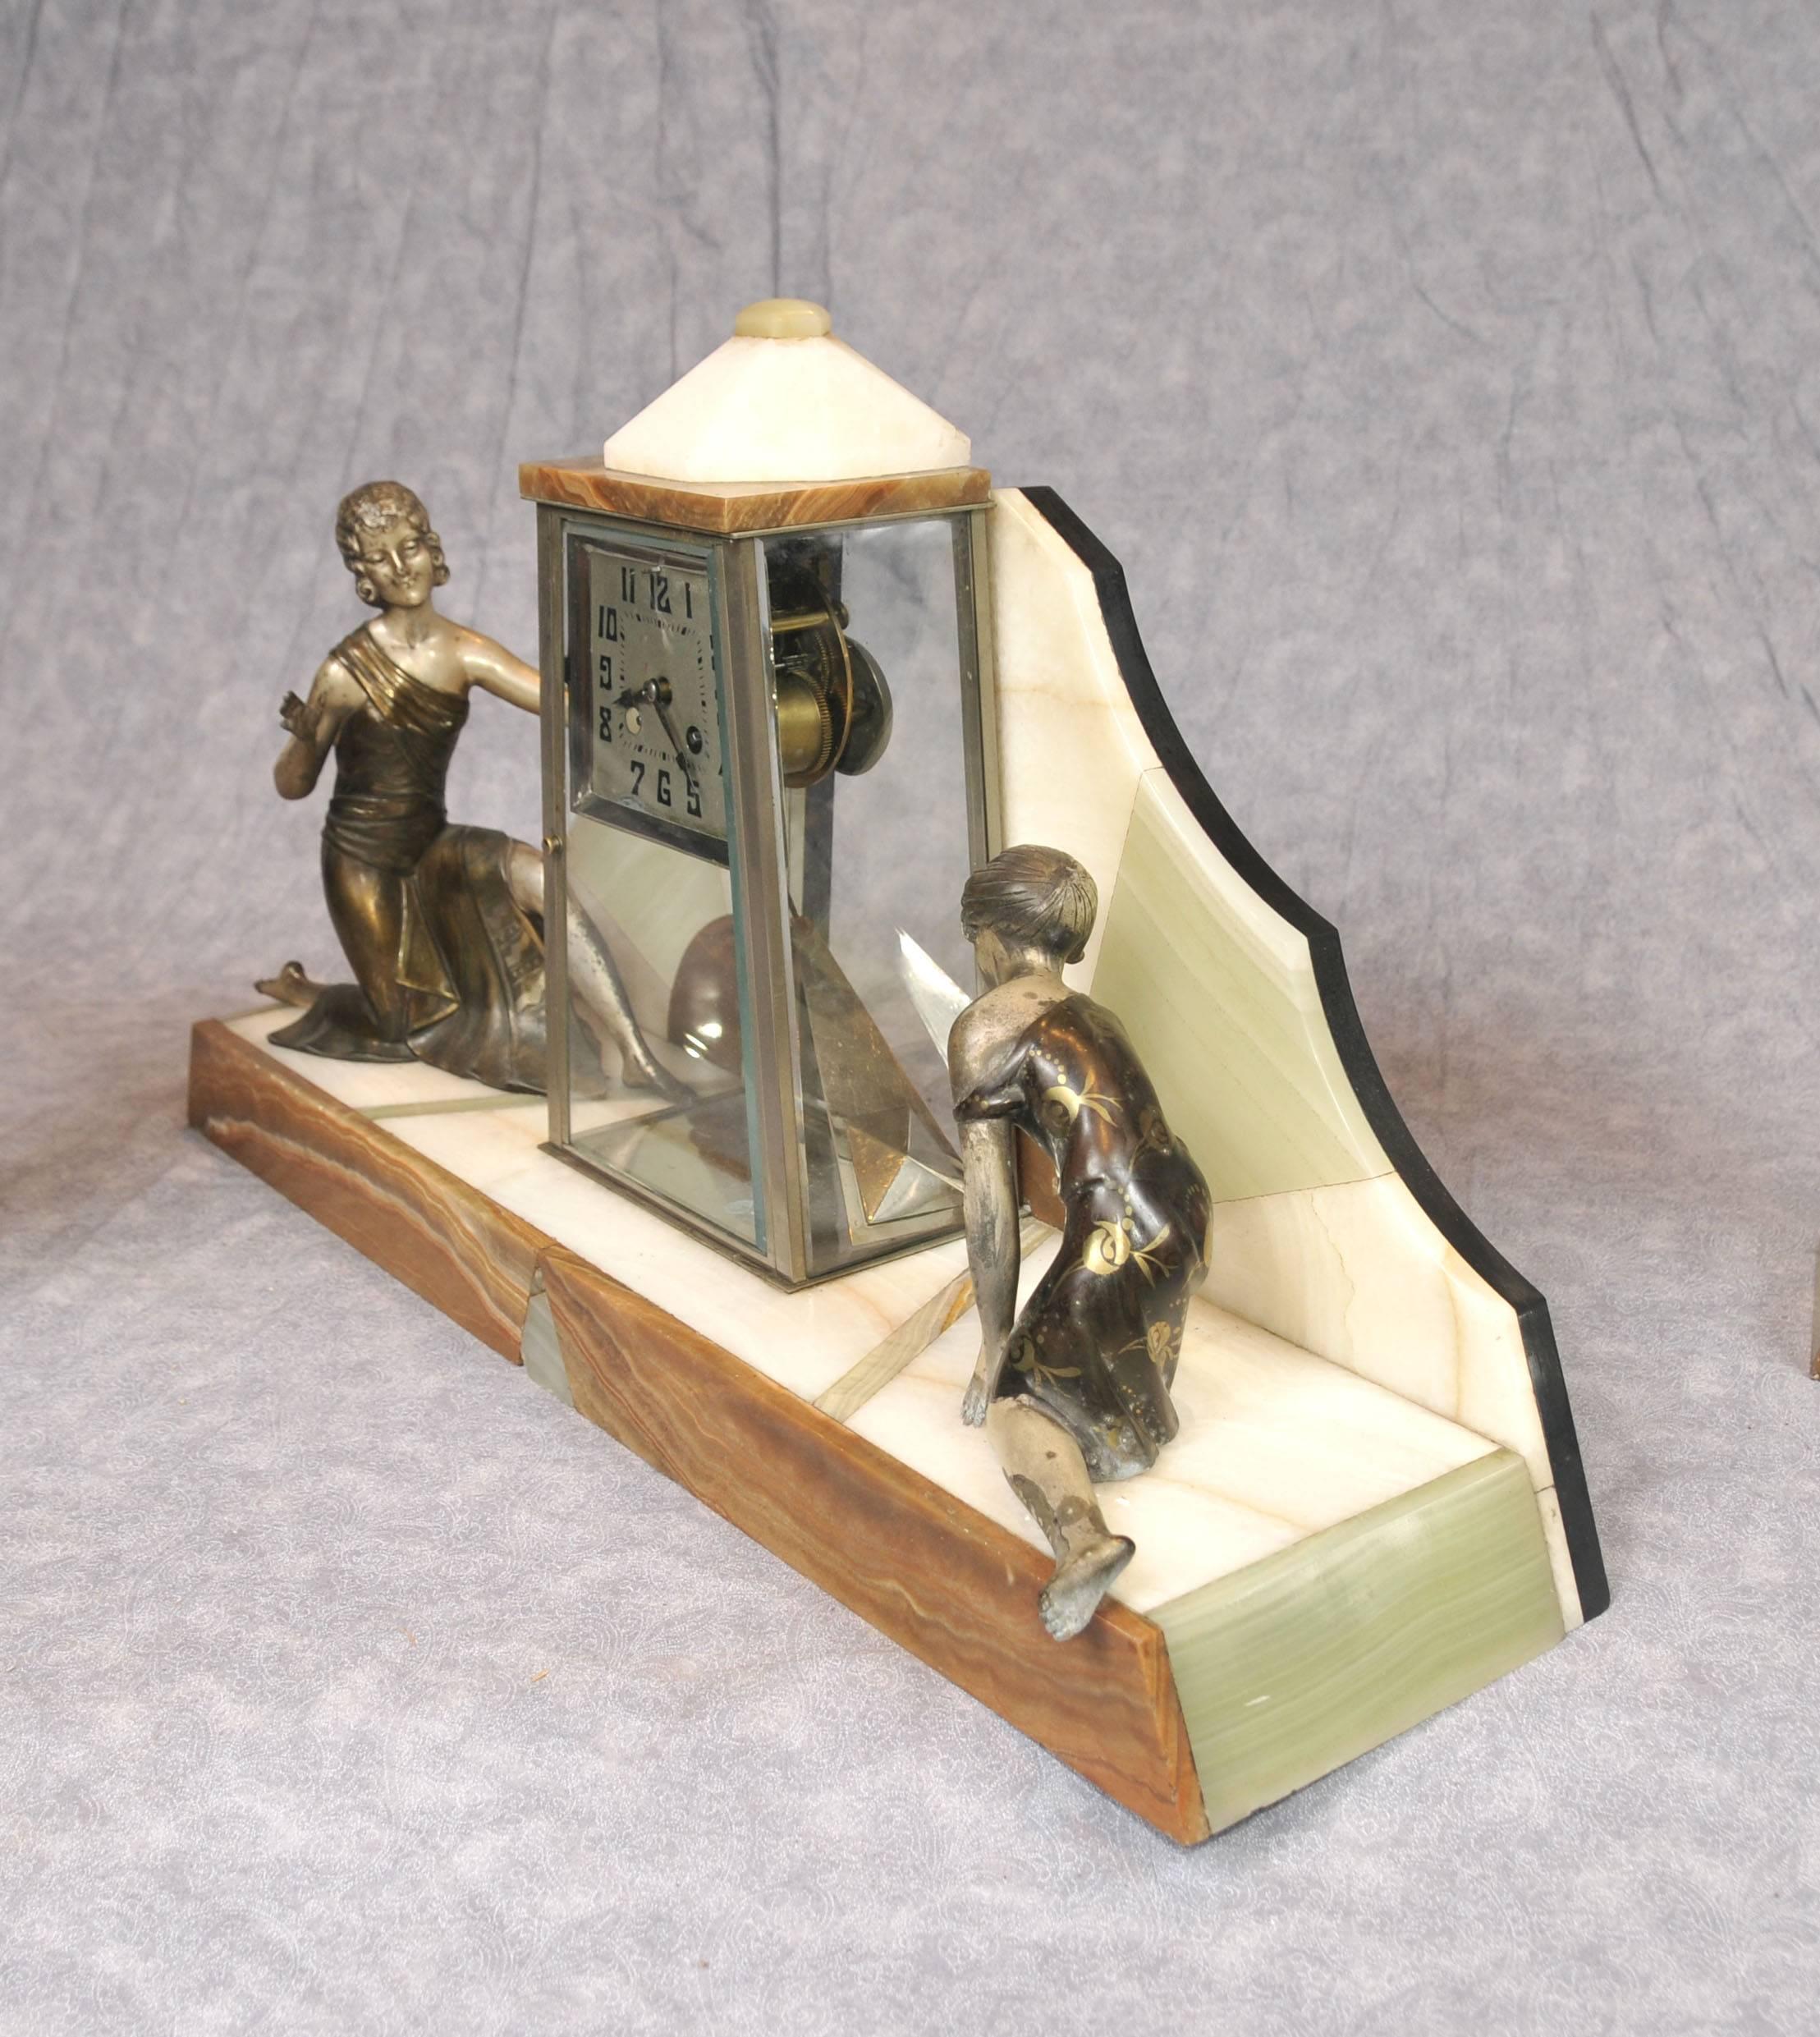 French Antique Art Deco Mantle Clock Set Spelter Figurine 1920s Marble Urns In Good Condition For Sale In Potters Bar, Herts